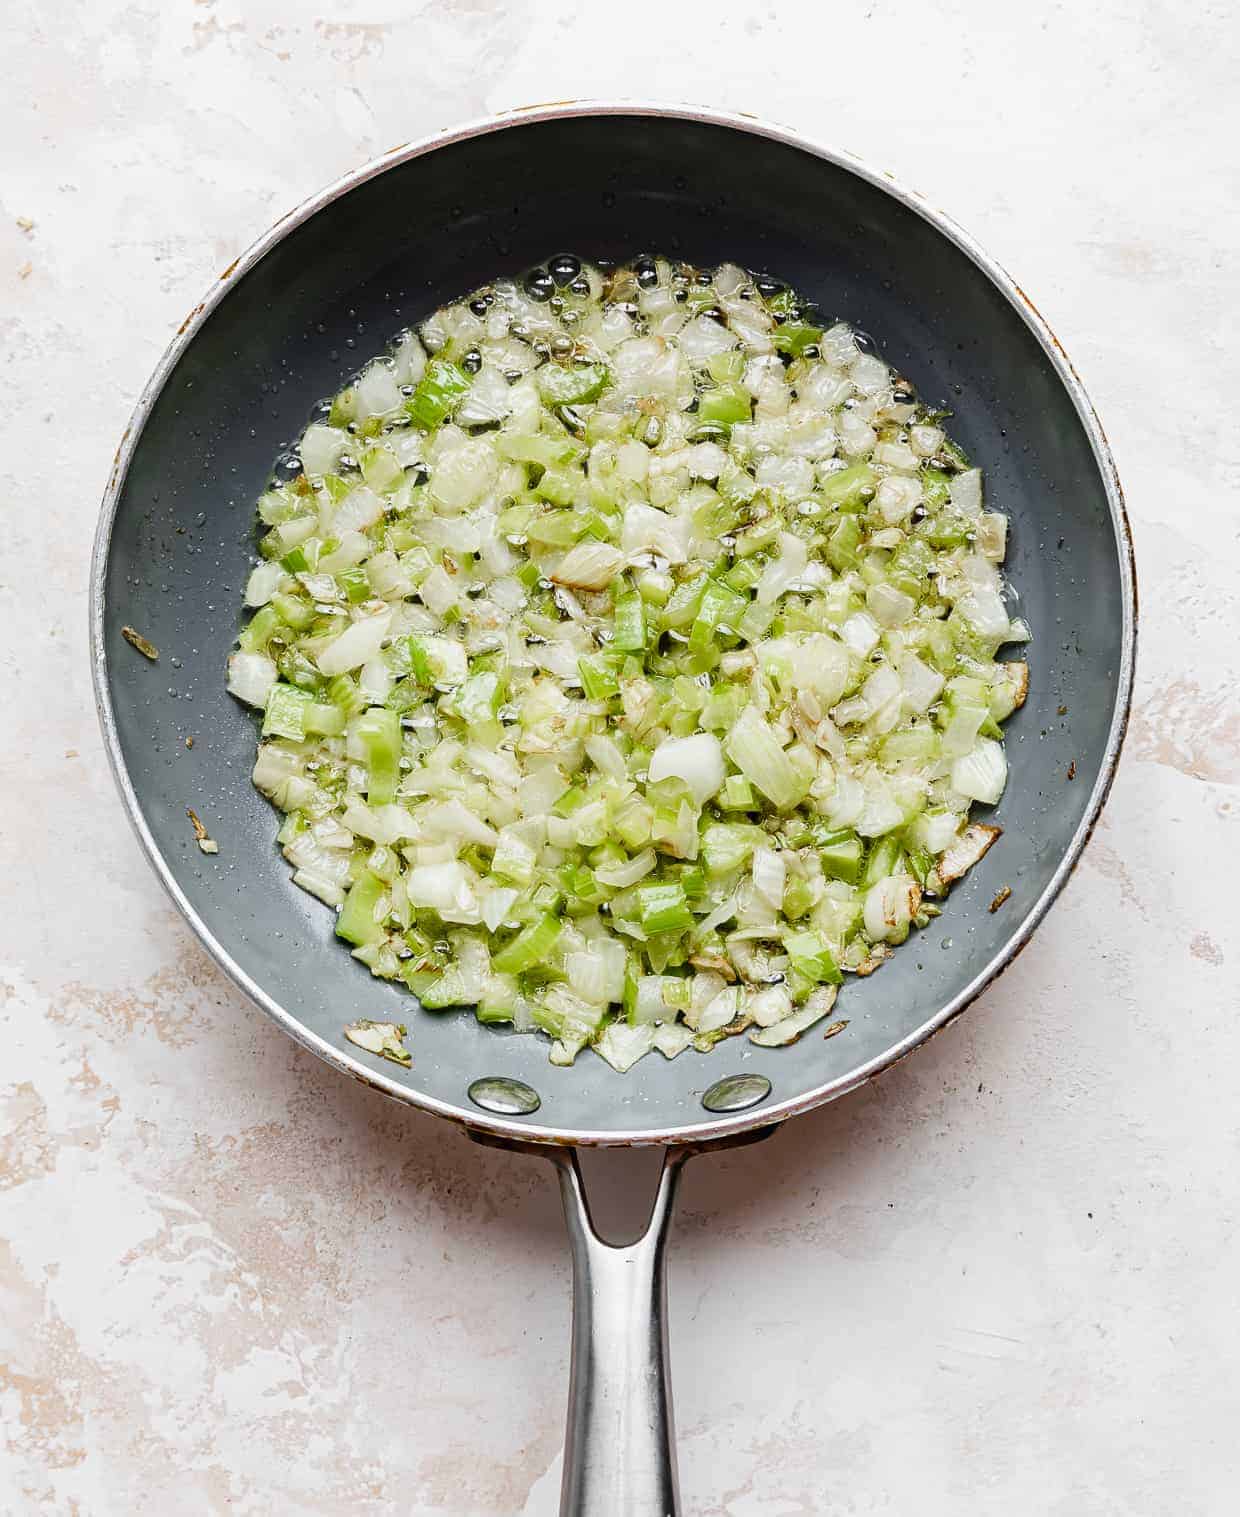 Cooked diced onion and celery in a small skillet.